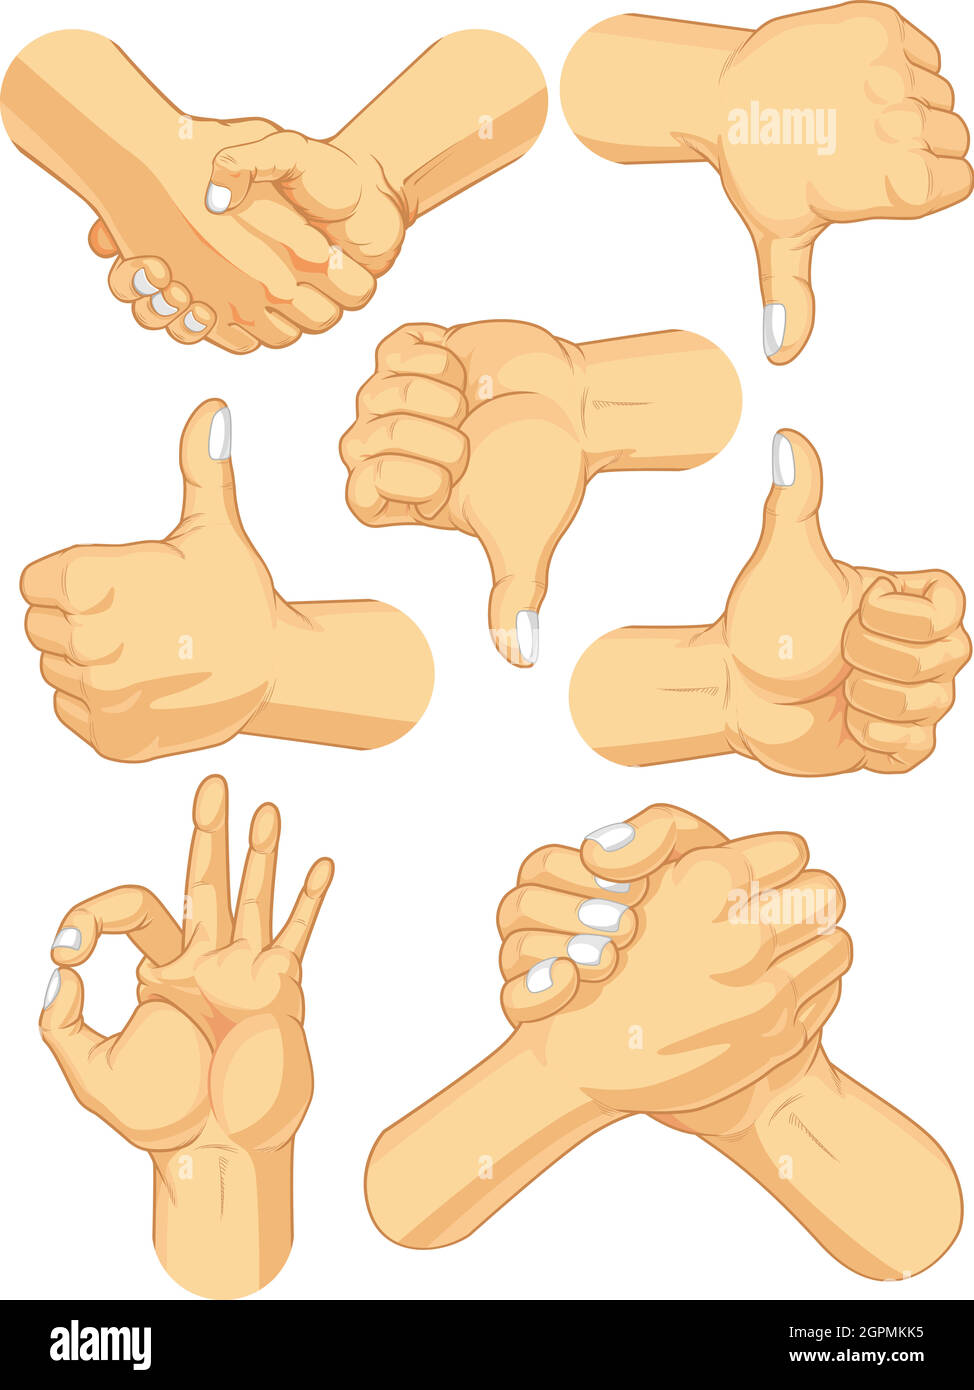 Premium Vector  Hand gesture emojis icons collection. handshake, biceps,  applause, thumb, peace, rock on, ok, folder hands gesturing. set of  different emoticon hands isolated illustration.